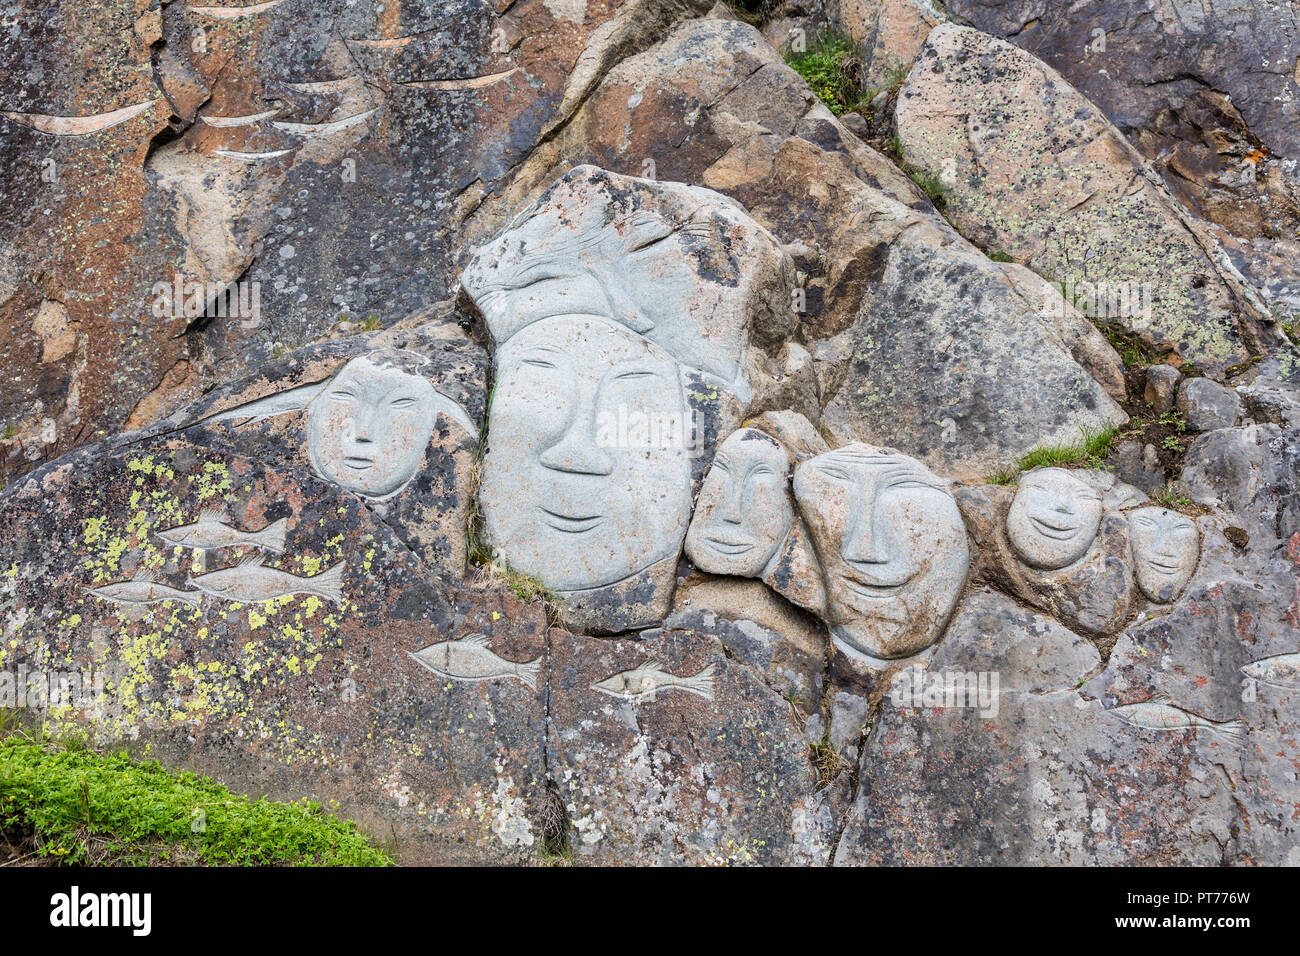 Faces on the rock face as part of the Stone & Man Sculpture, Qaqortoq, Greenland Stock Photo